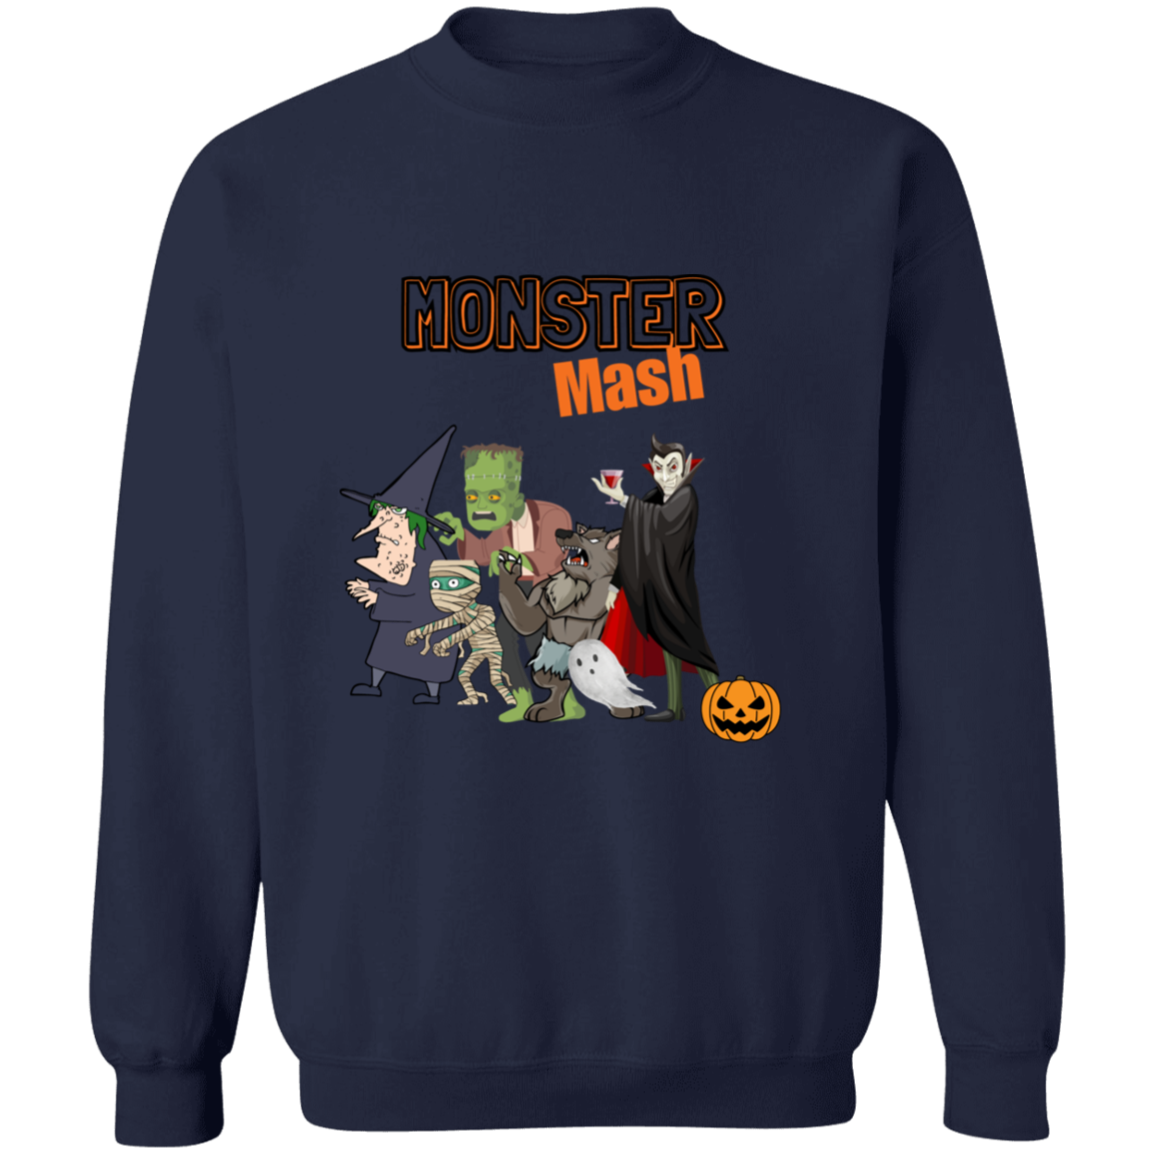 Get trendy with MONSTER Mash  Pullover Crewneck  Sweatshirt - Sweatshirts available at Good Gift Company. Grab yours for $39.95 today!